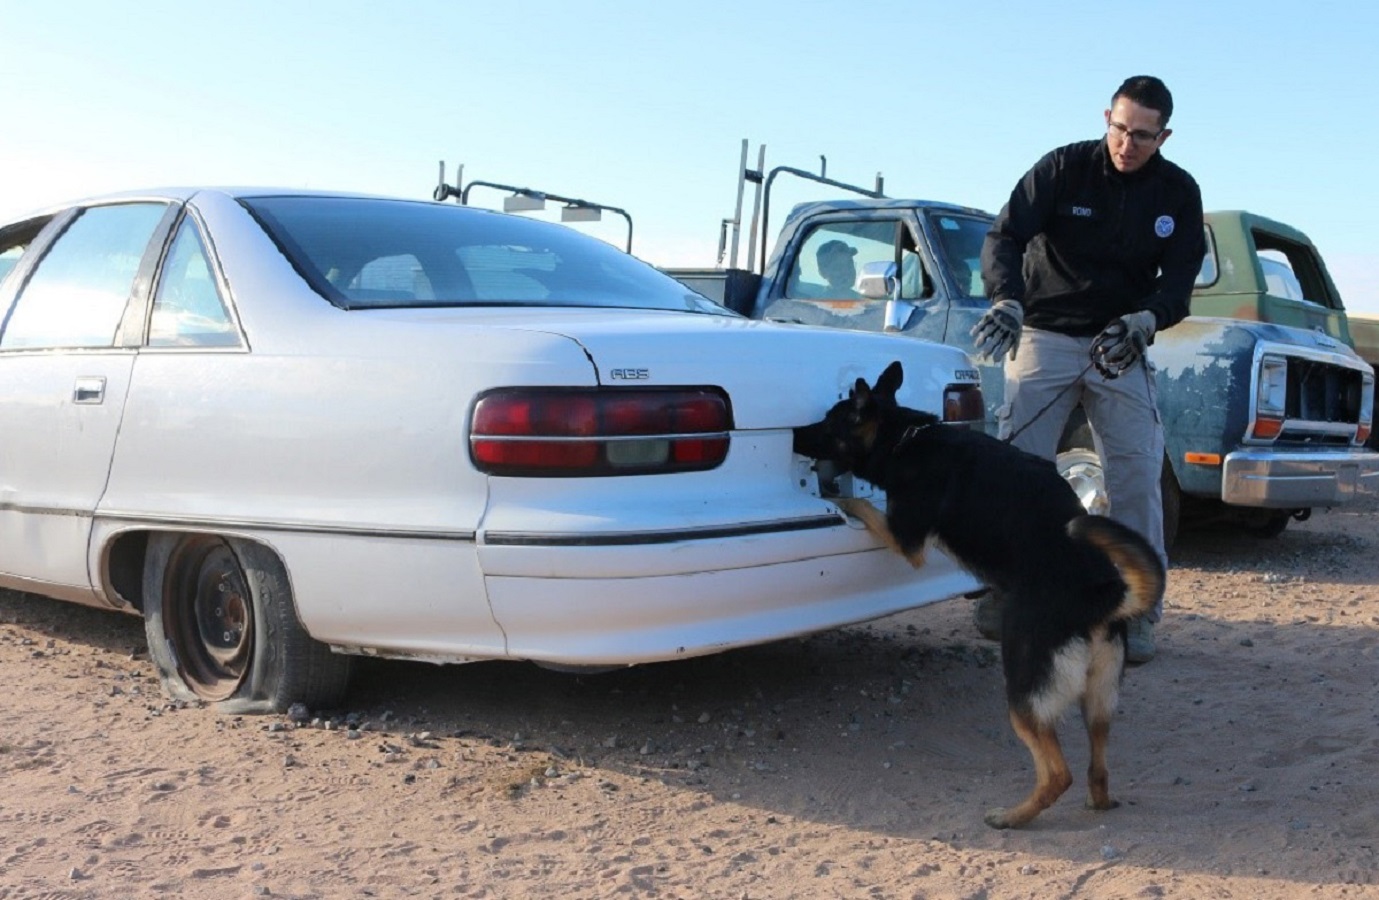 CBP Officer conducts a vehicle search during training with a canine.